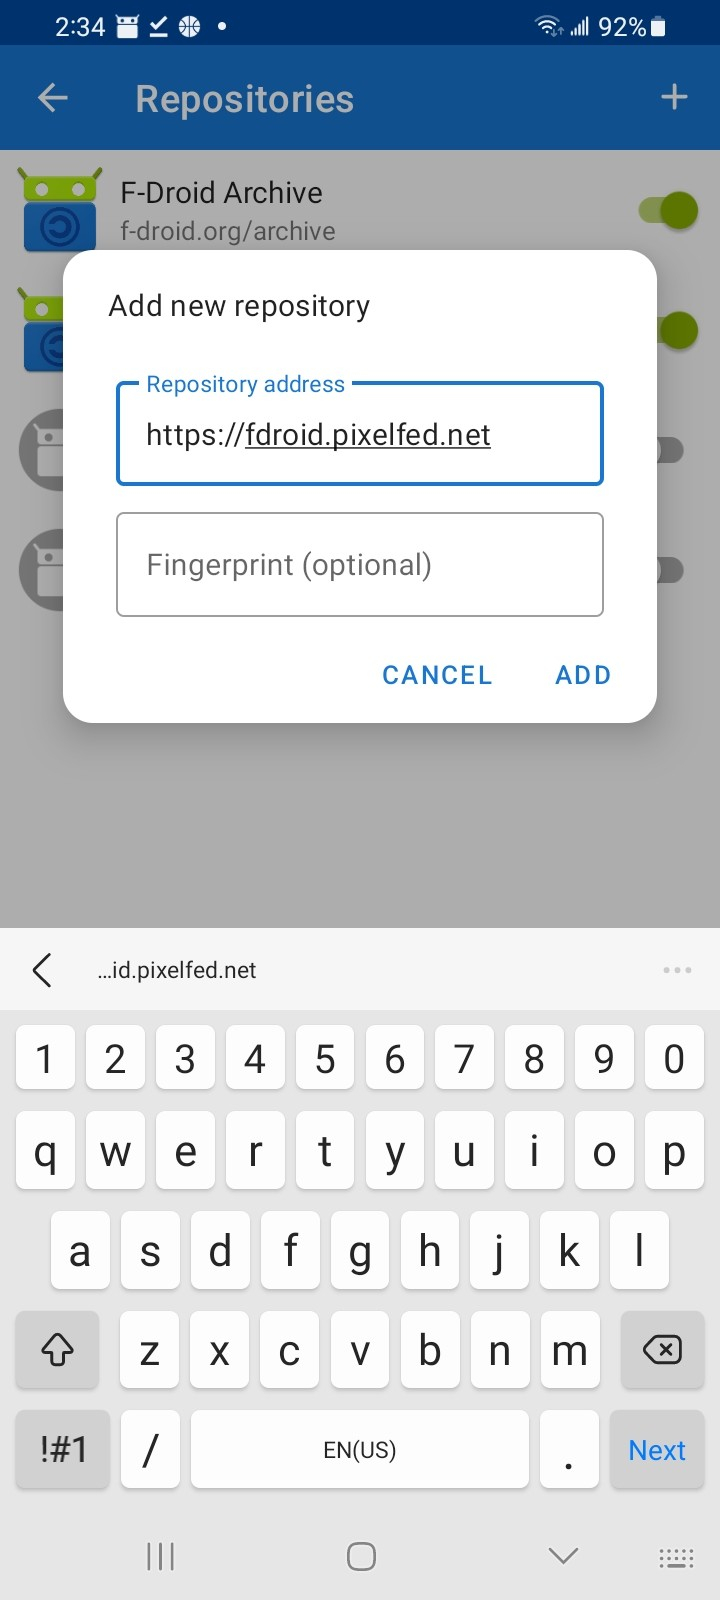 Adding the Pixelfed repo to F-Droid